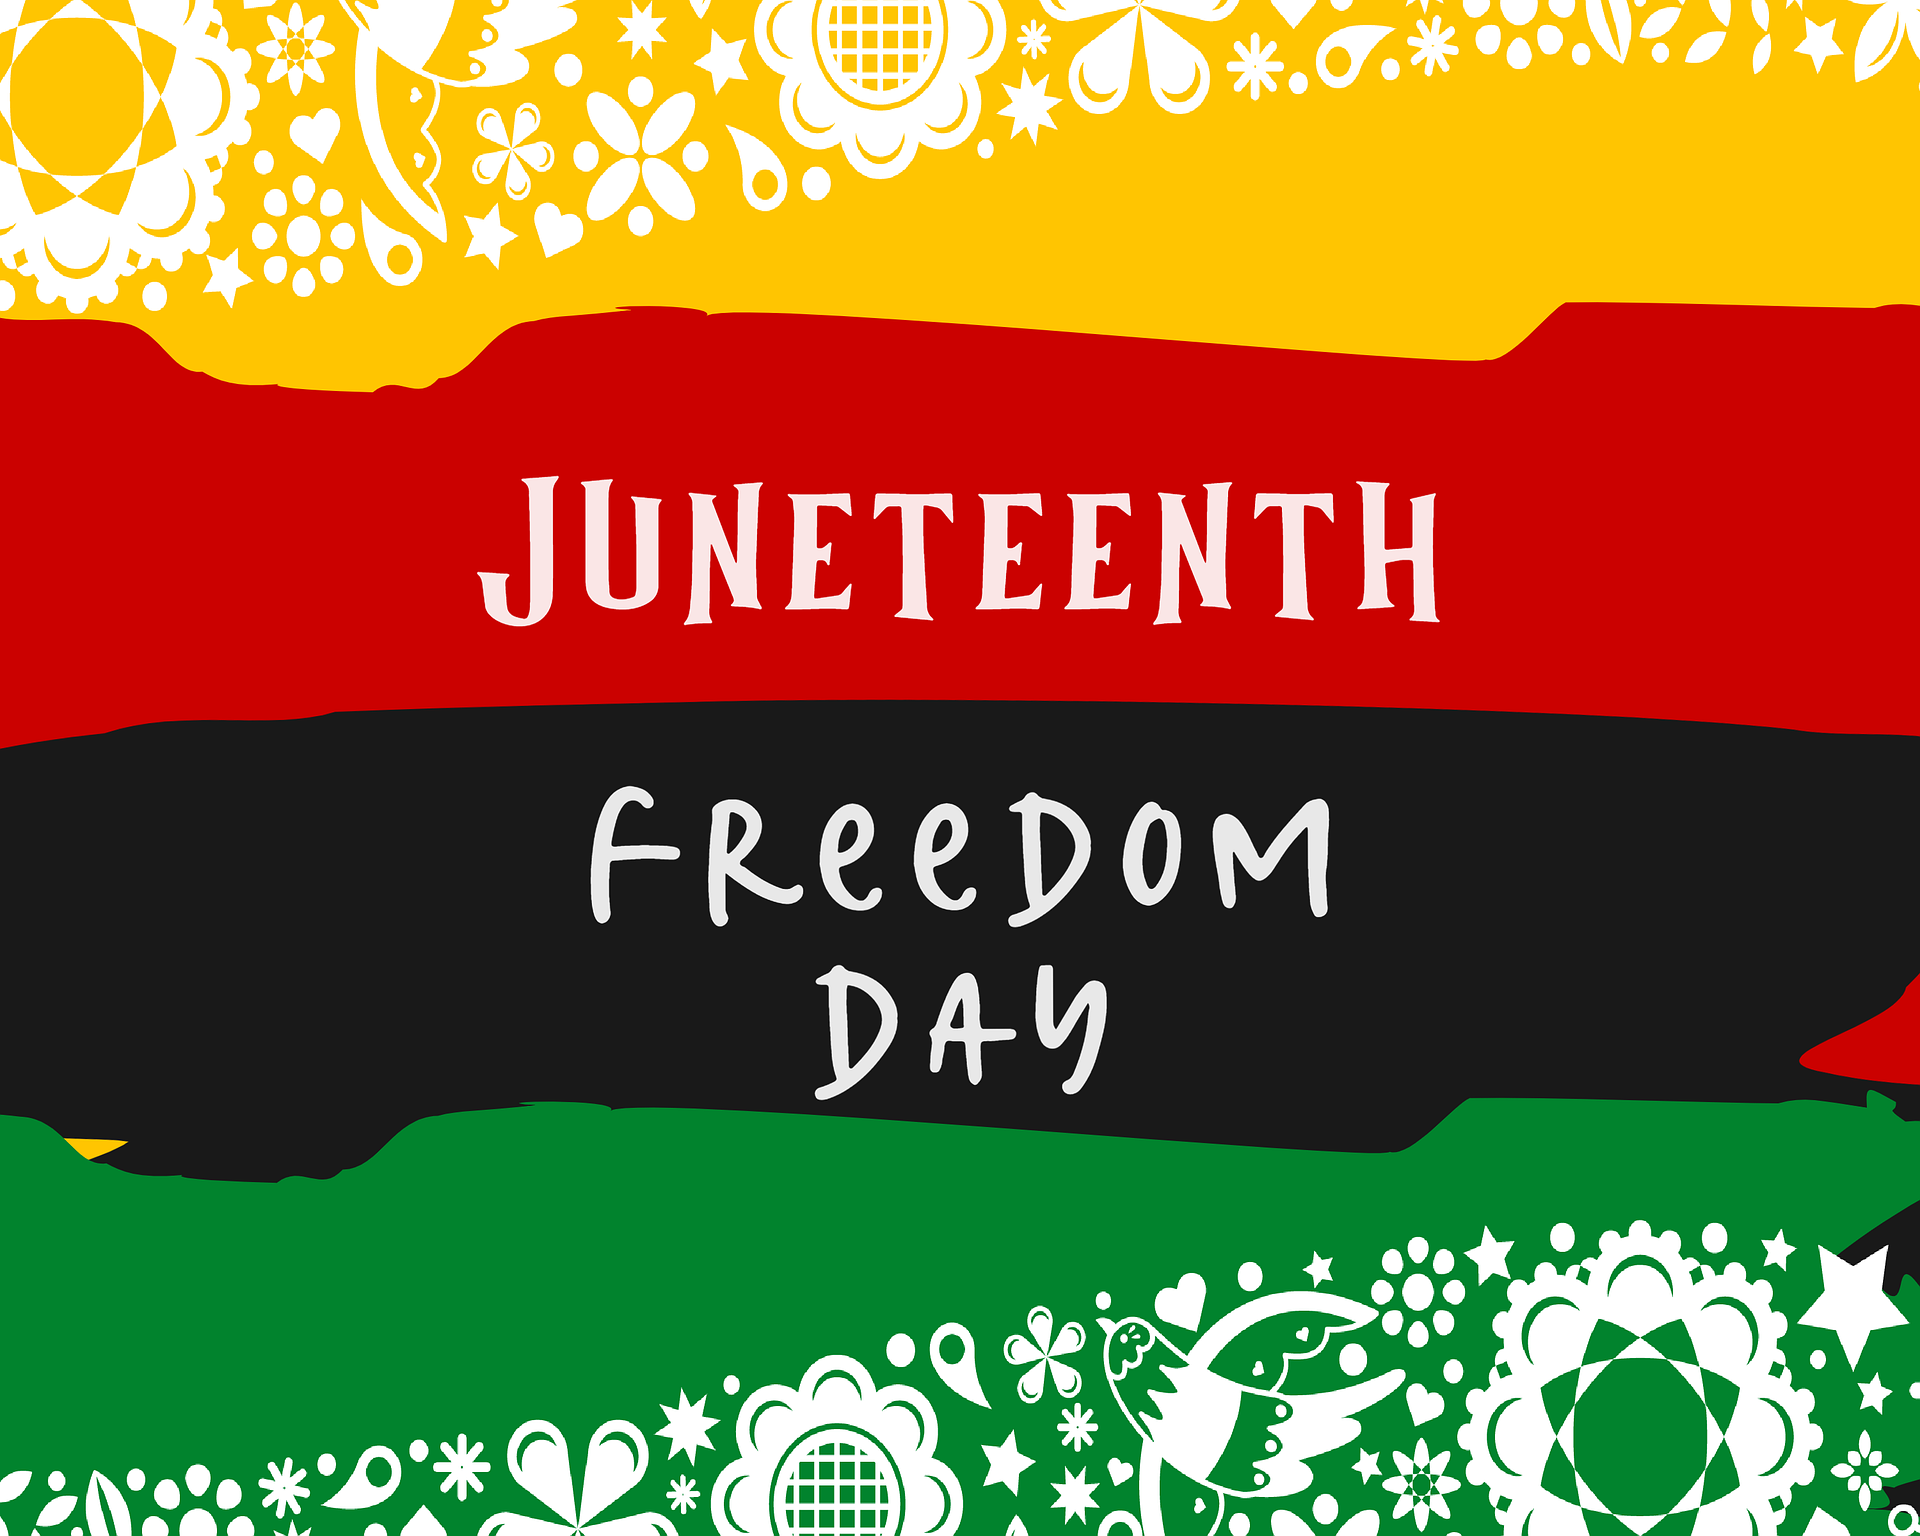 graphic for Juneteenth fredom day